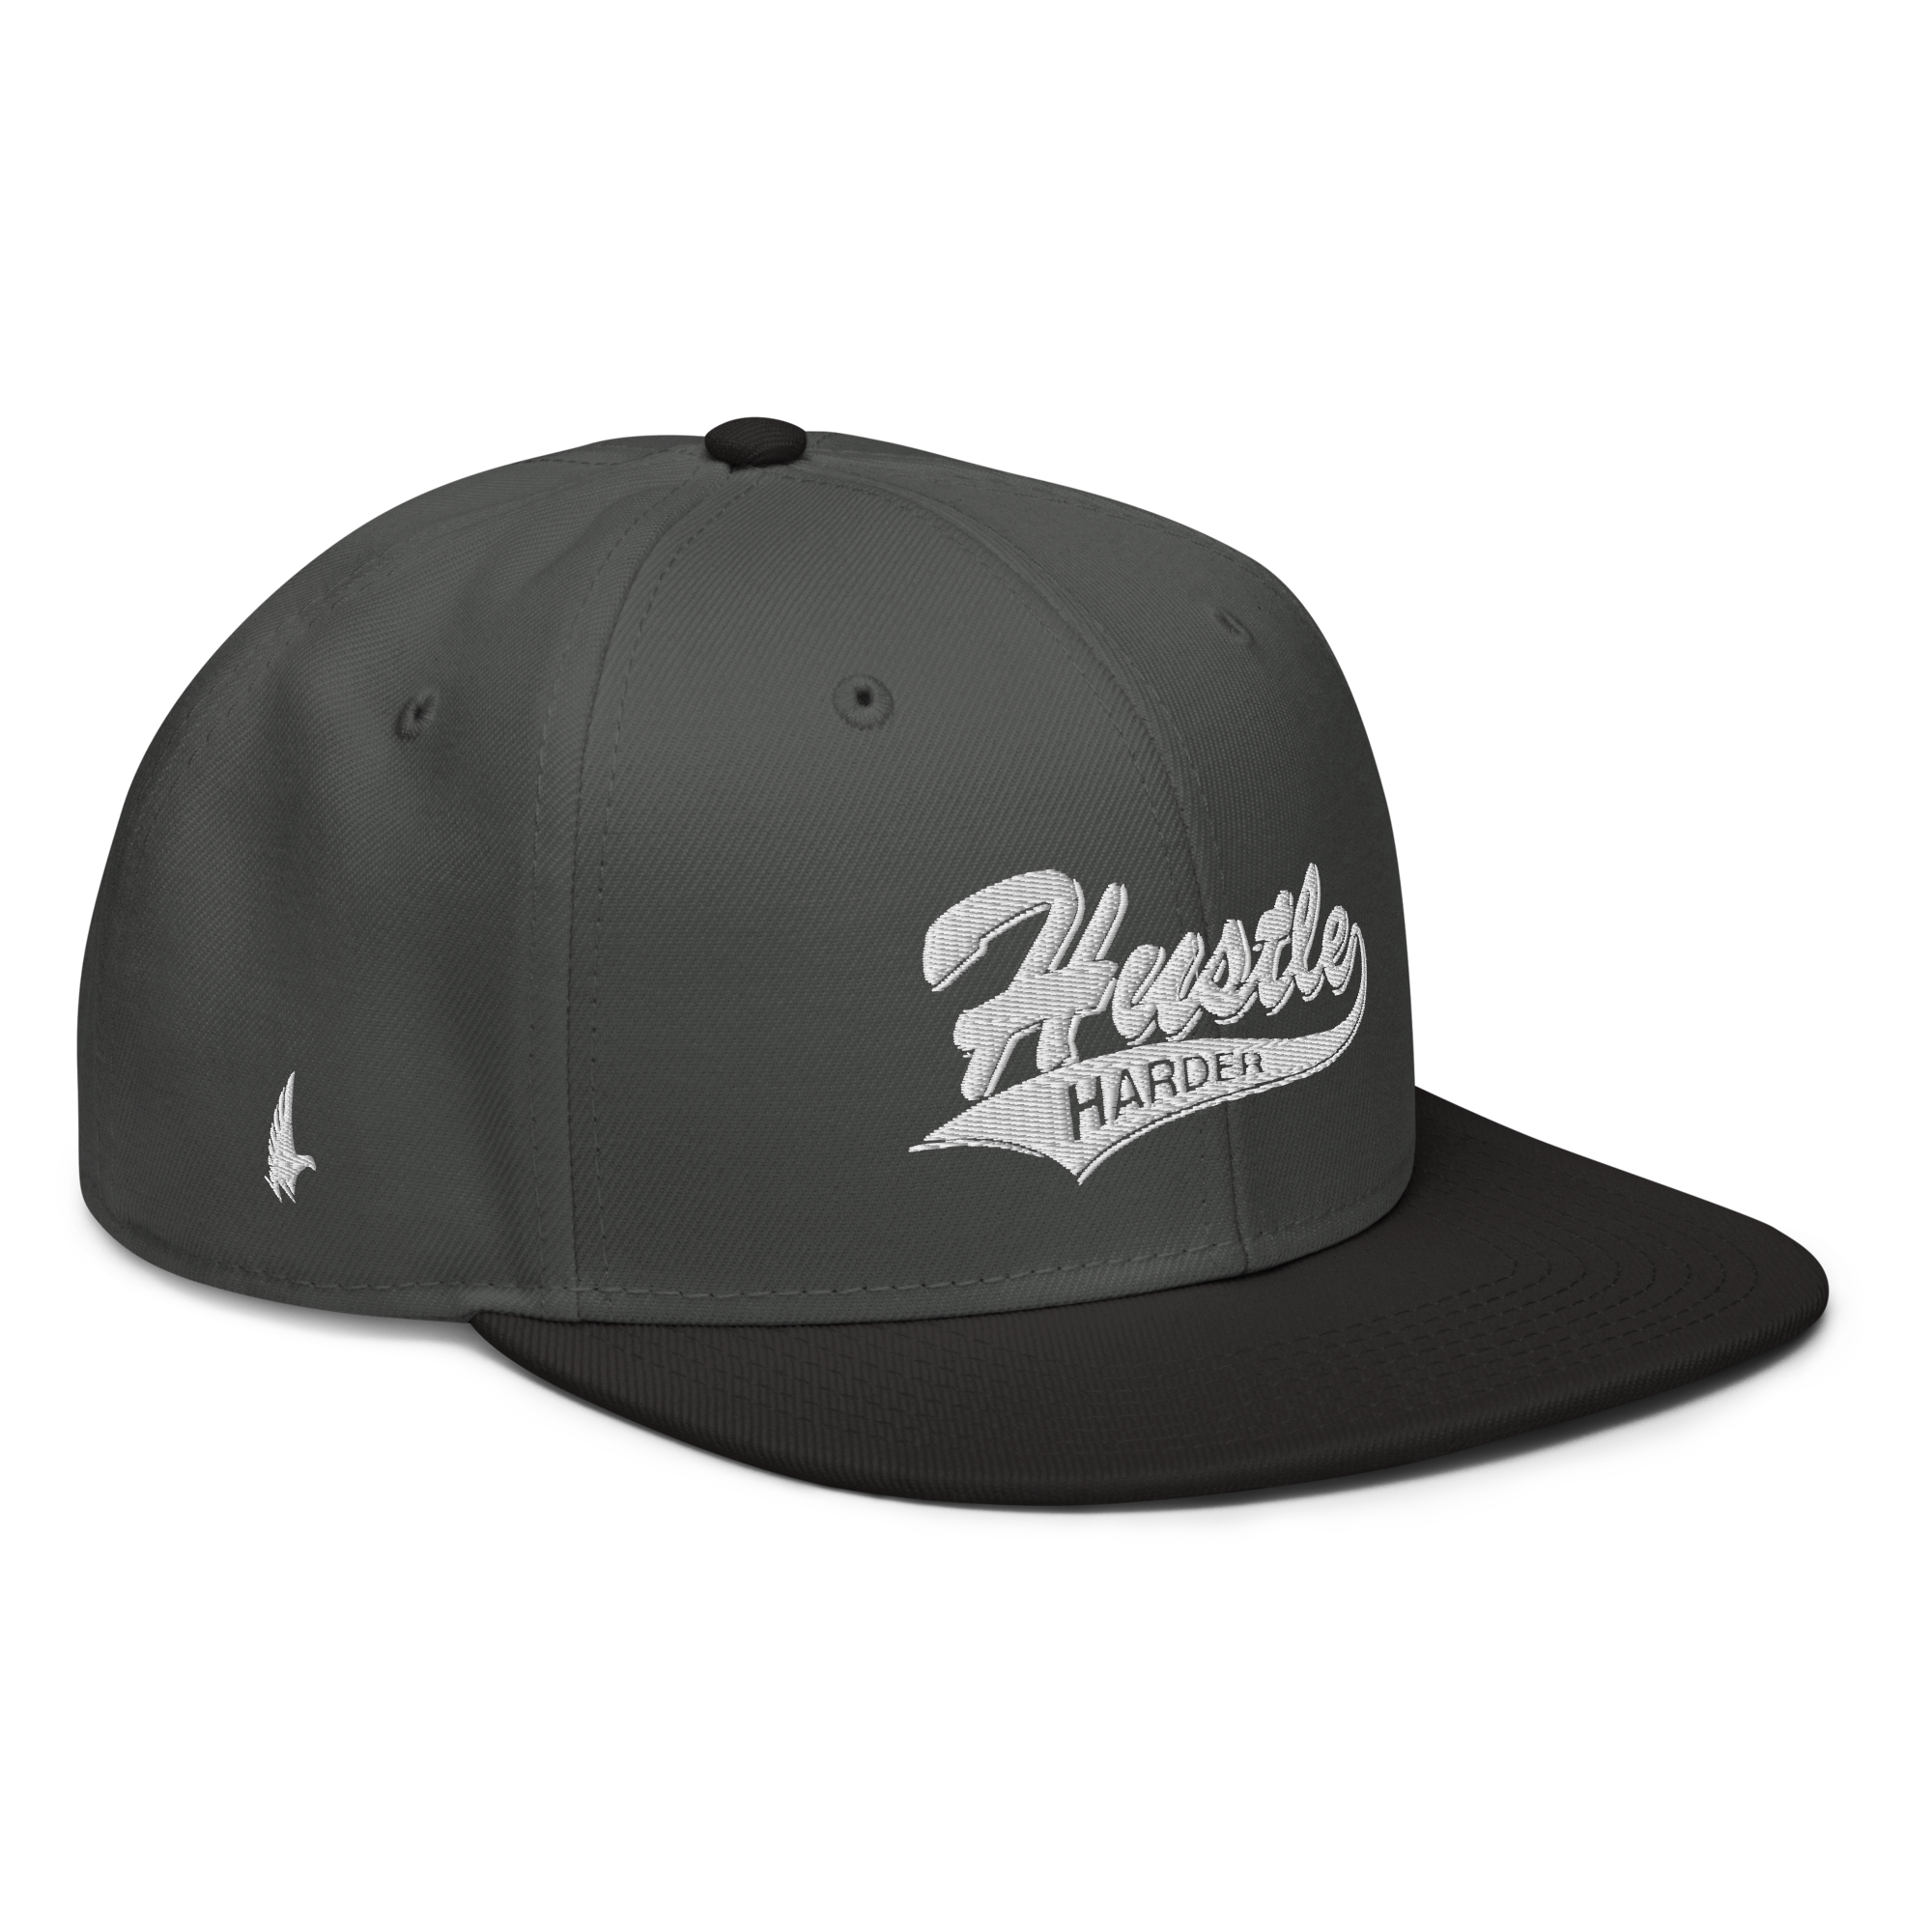 Hustle Harder Snapback Hat - Charcoal Gray / White OS - Loyalty Vibes